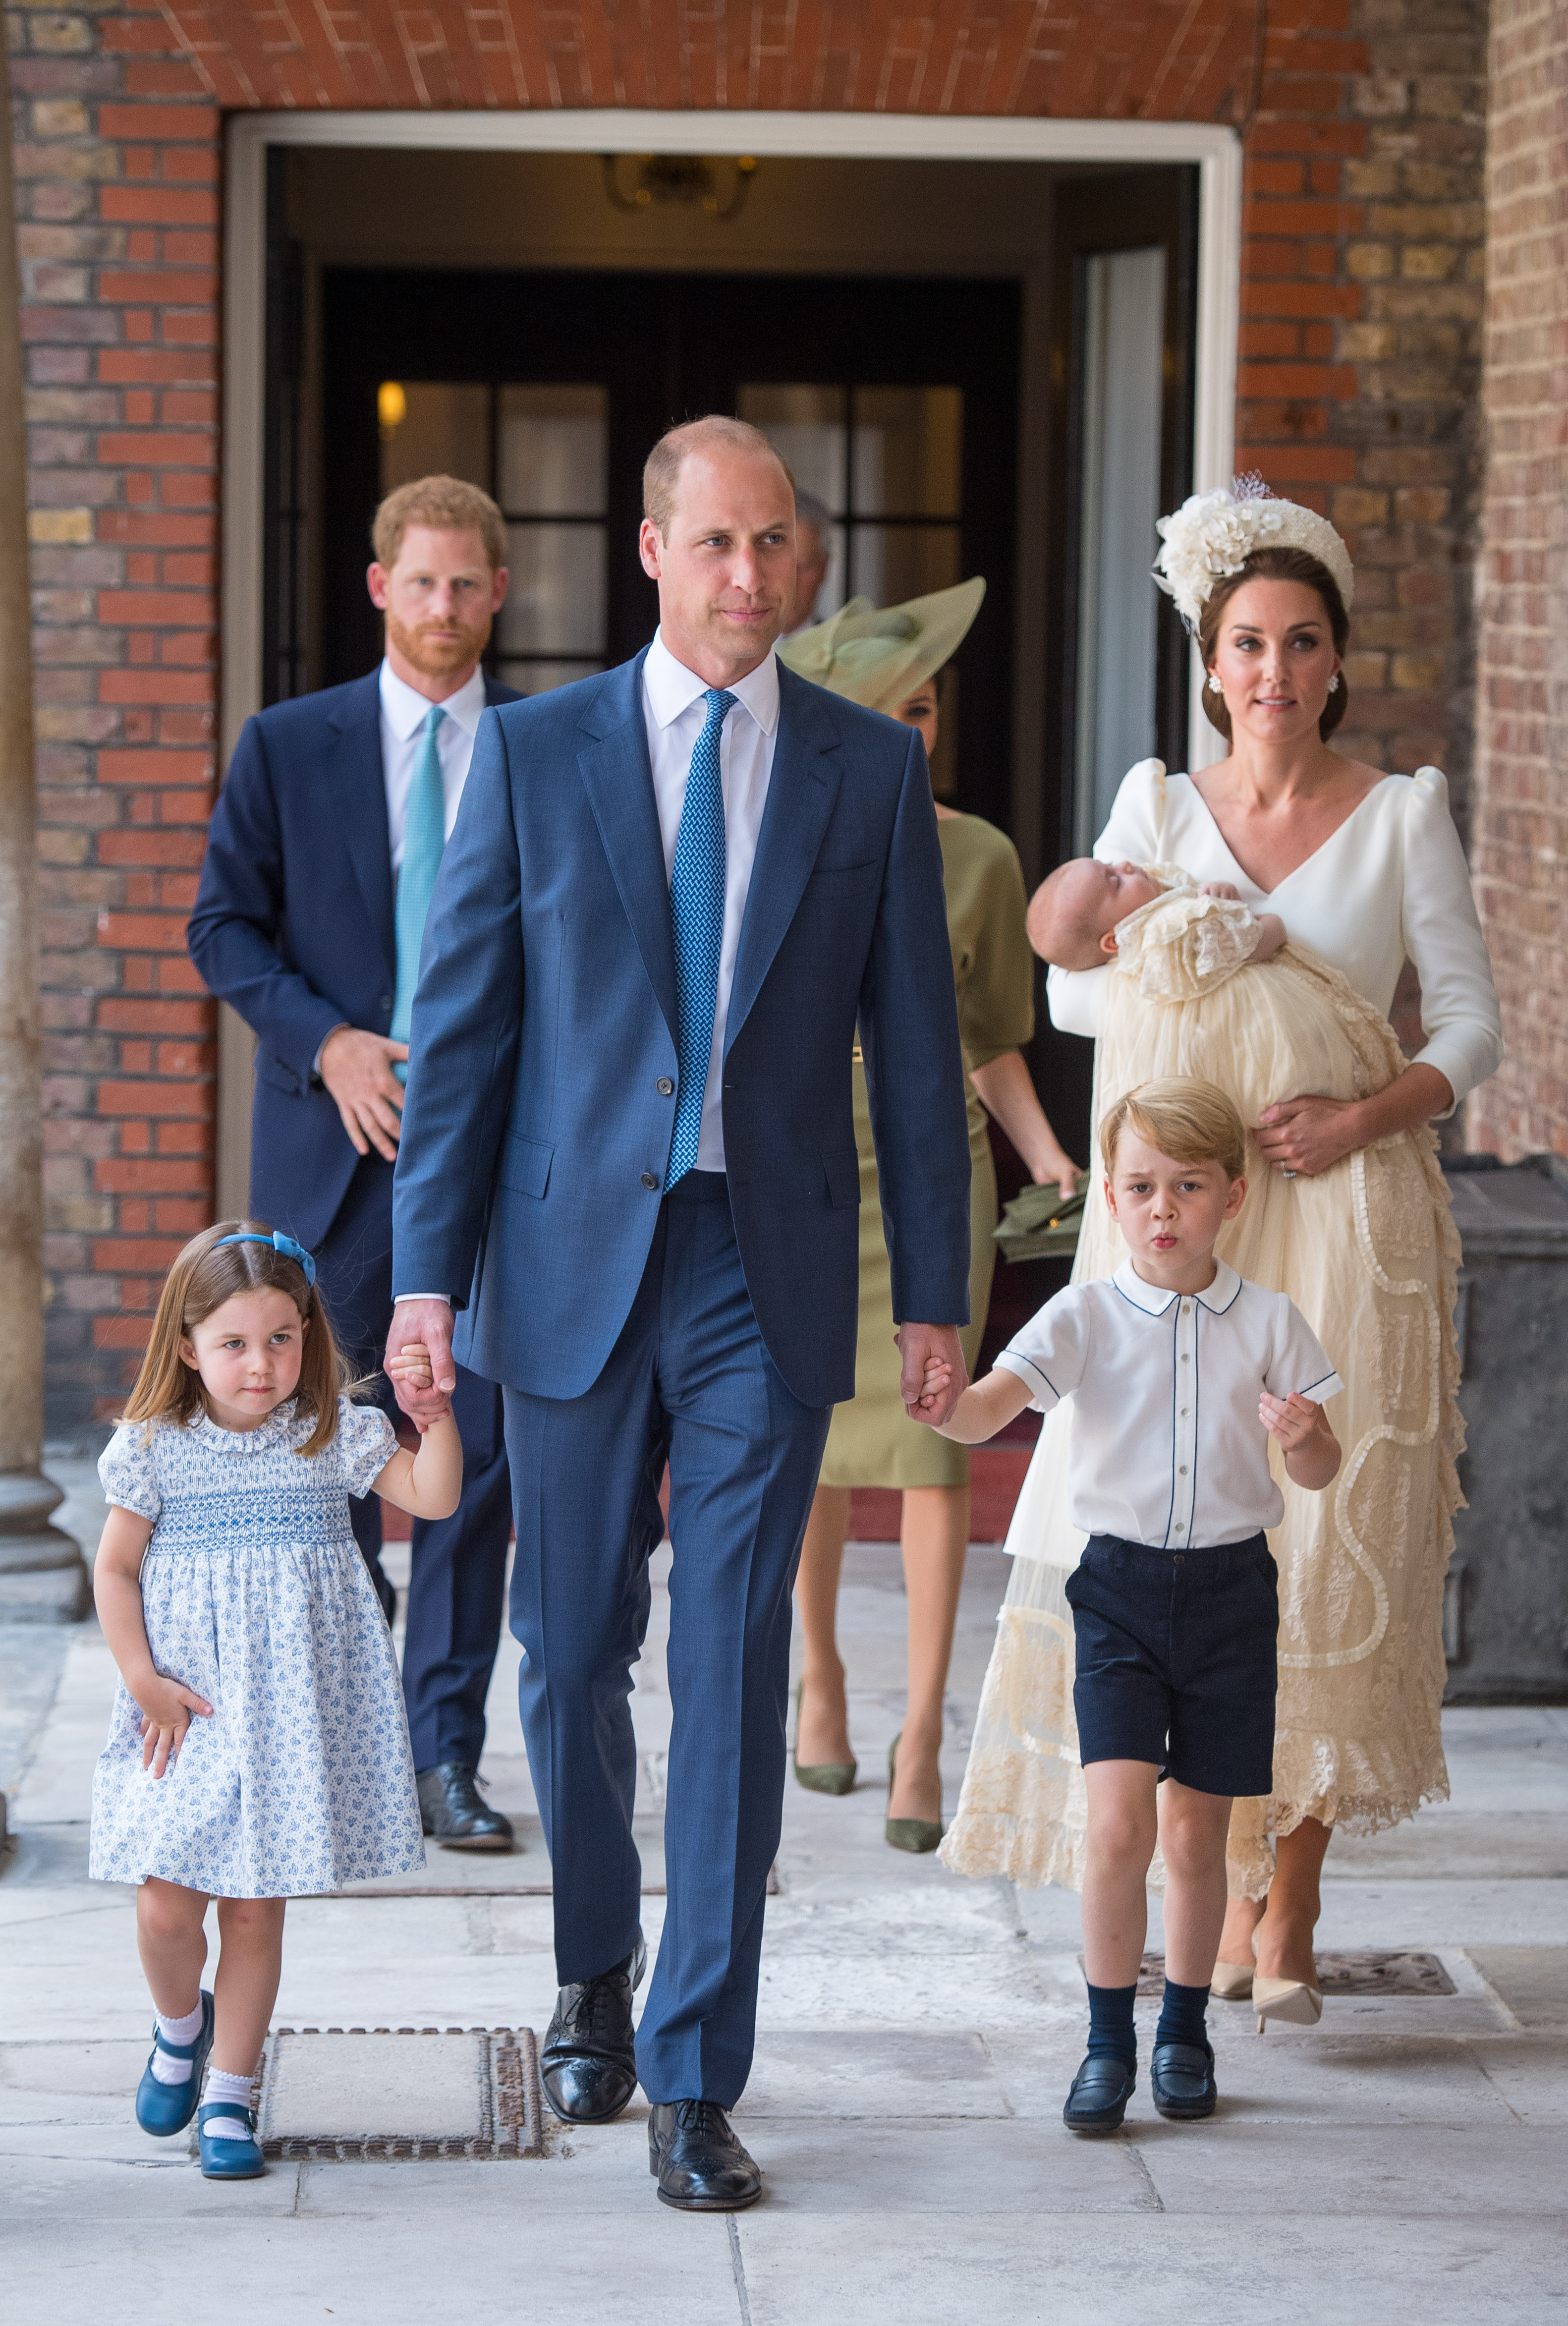 Princess Charlotte and Prince George hold the hands of their father, Prince William, Duke of Cambridge, as they arrive at the Chapel Royal, St James's Palace, London for the christening of their brother, Prince Louis, who is being carried by their mother, Catherine, Duchess of Cambridge on July 09, 2018 in London, England. (Photo by Dominic Lipinski - WPA Pool/Getty Images) (WPA Pool—Getty Images)